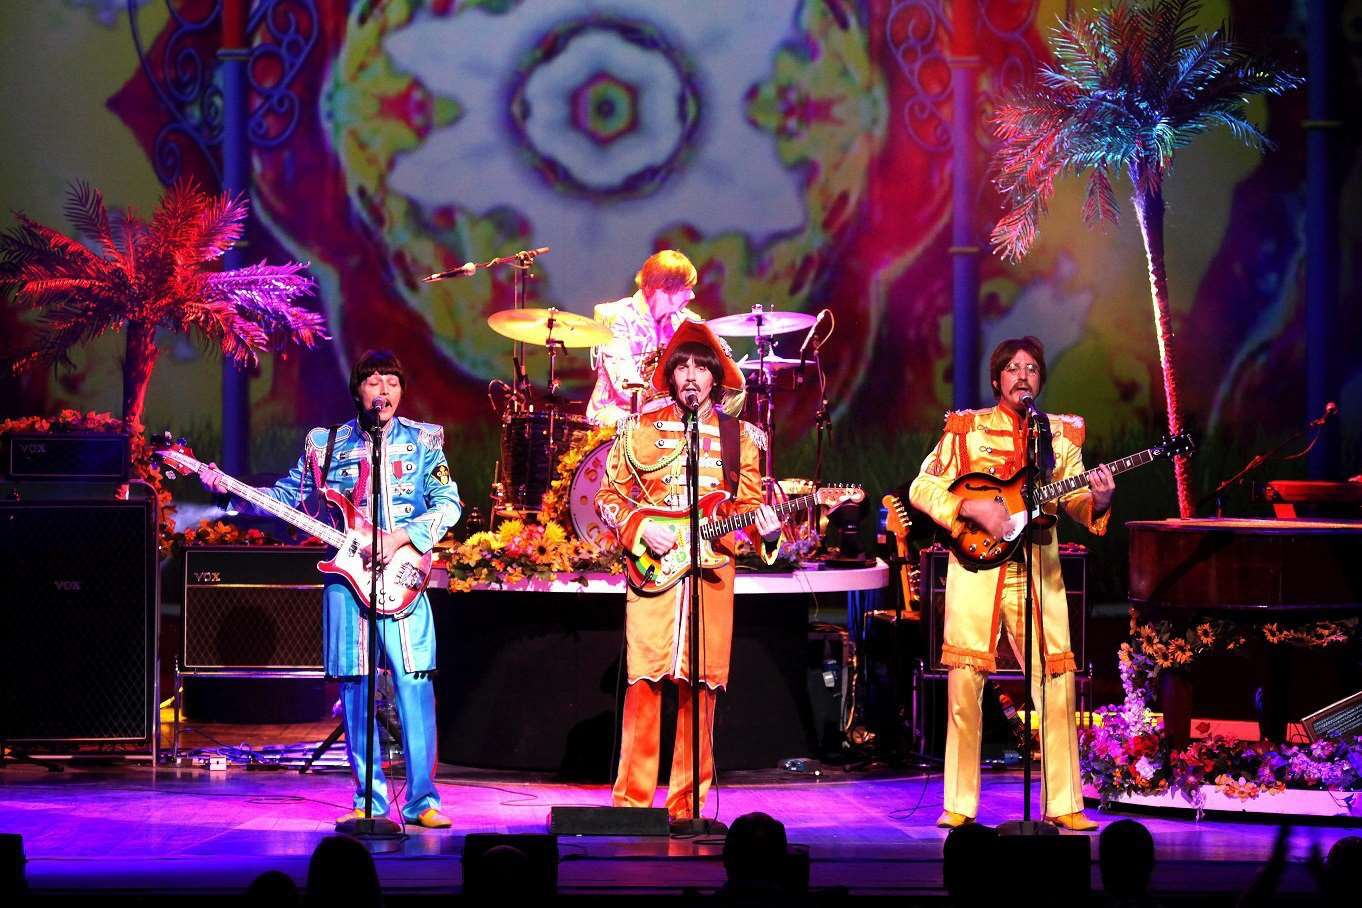 The Sgt Pepper days in Let It Be